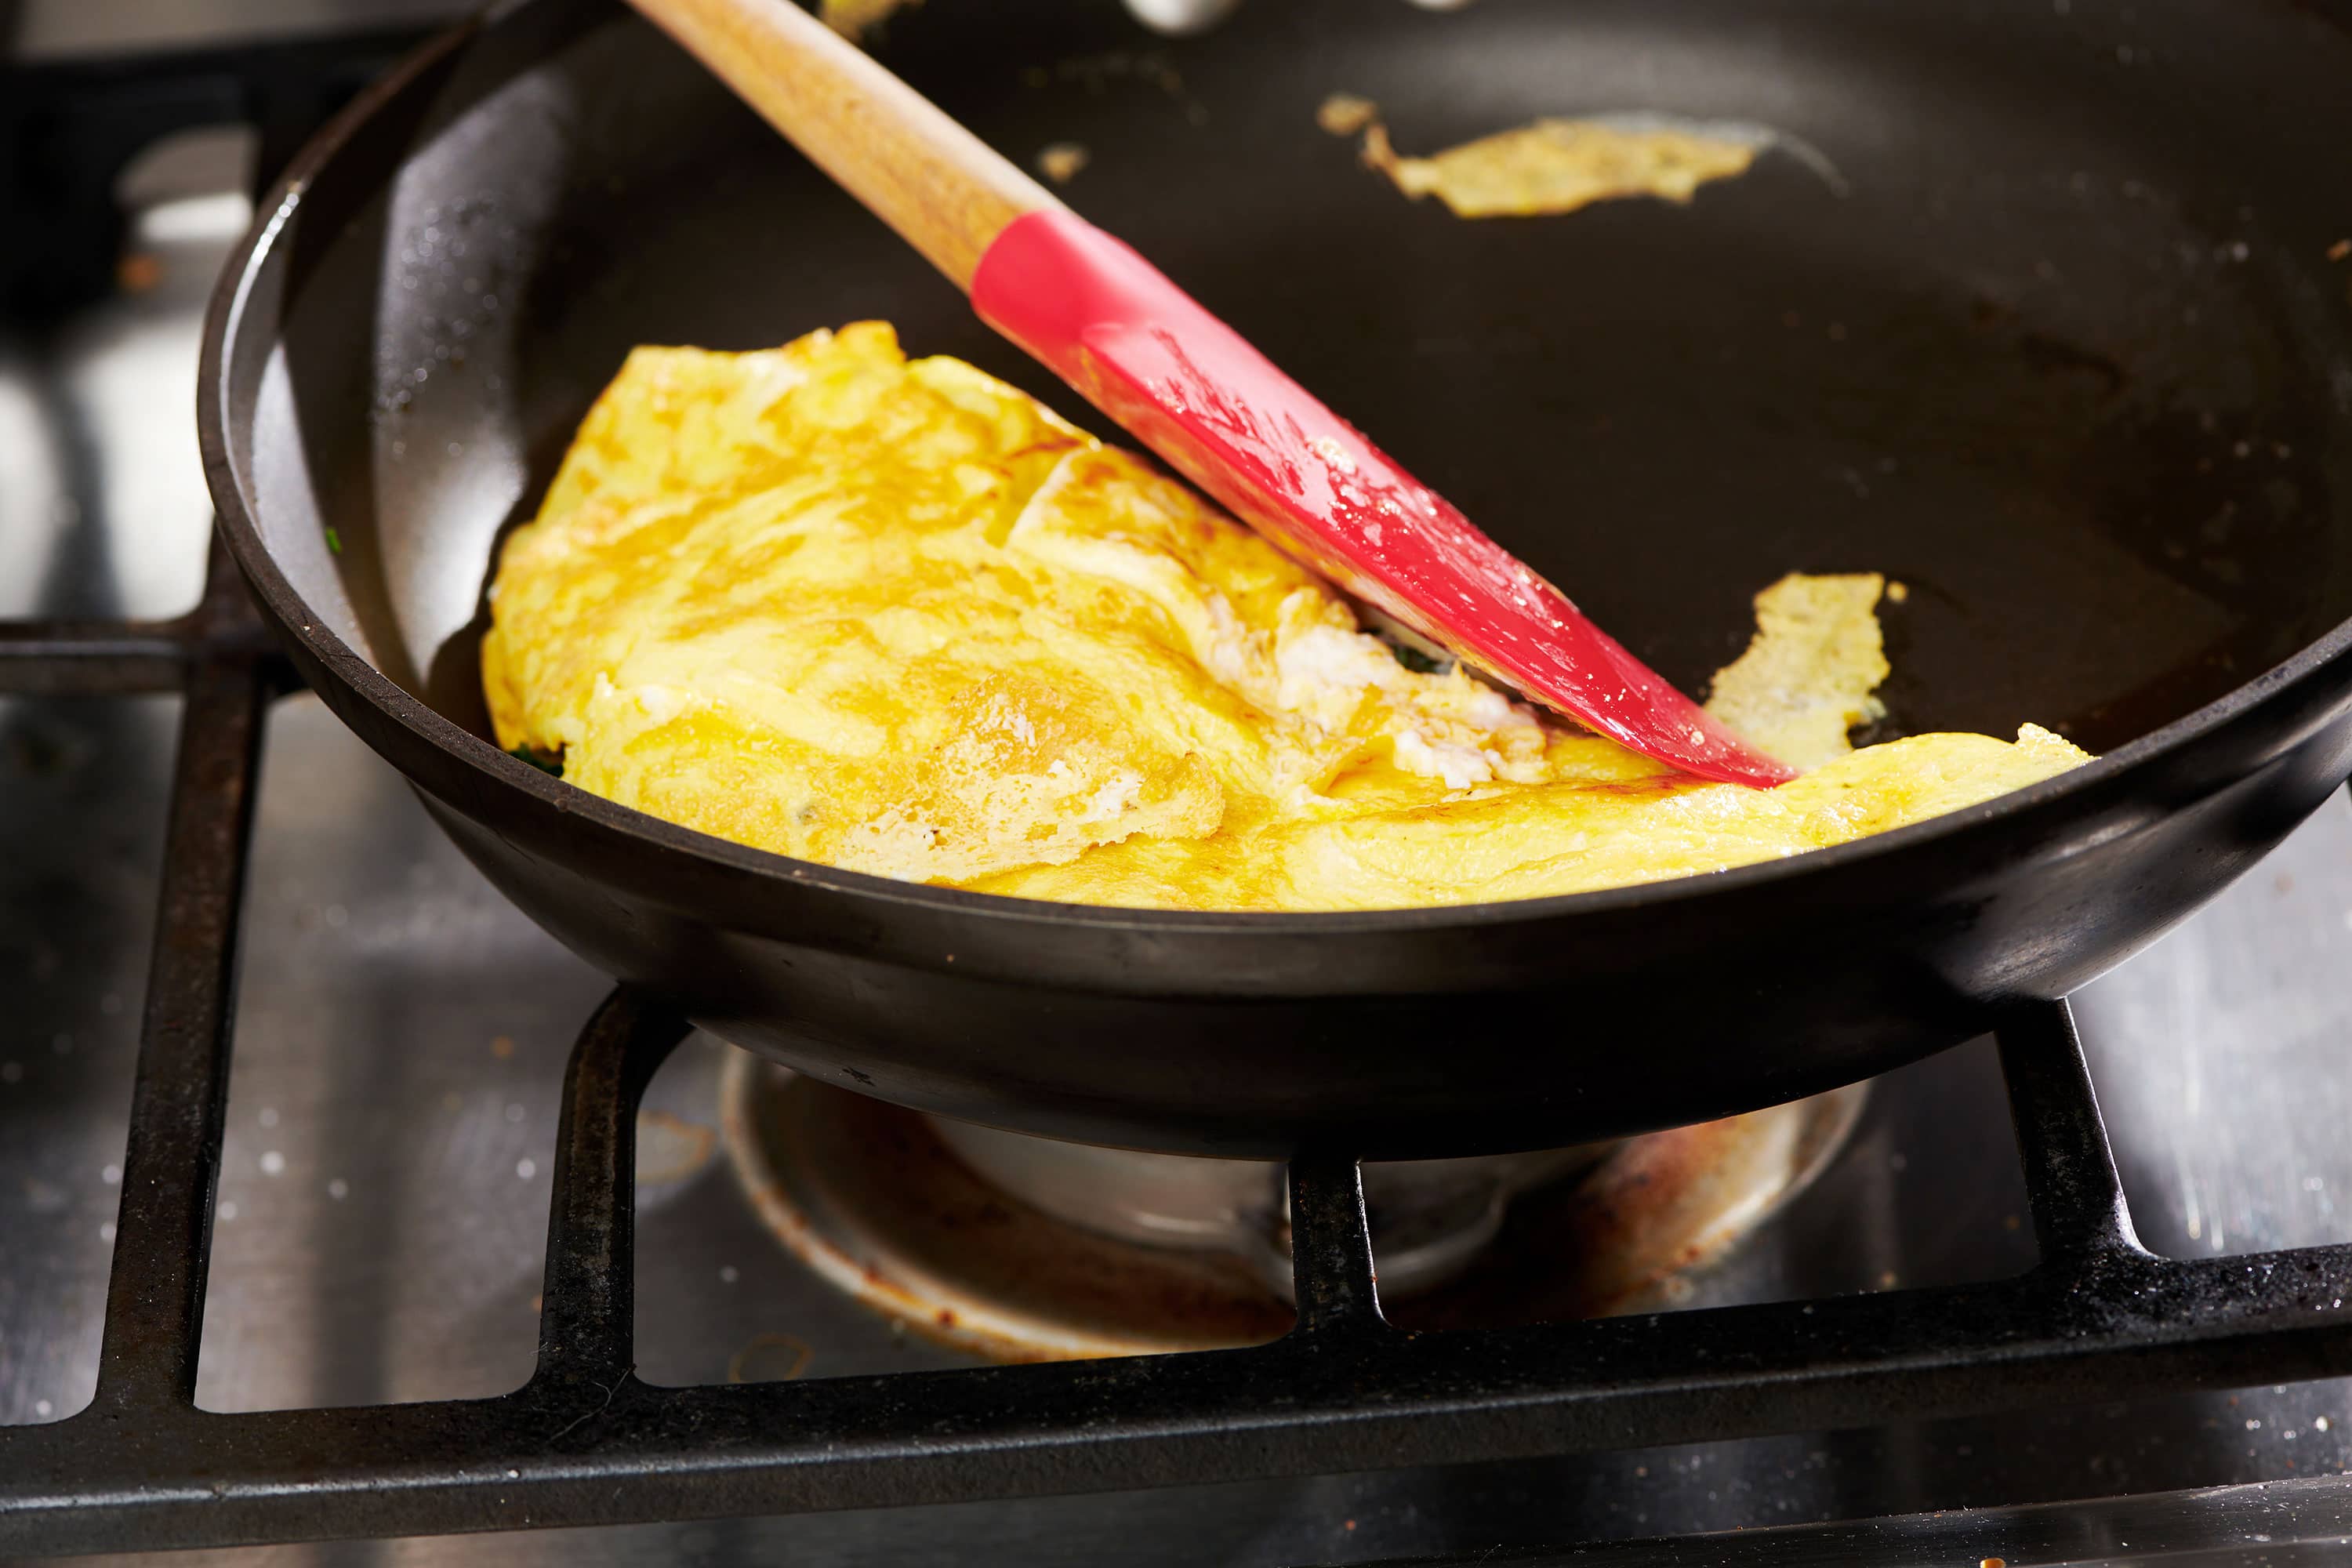 https://themom100.com/wp-content/uploads/2021/01/how-to-make-an-omelet-211.jpg